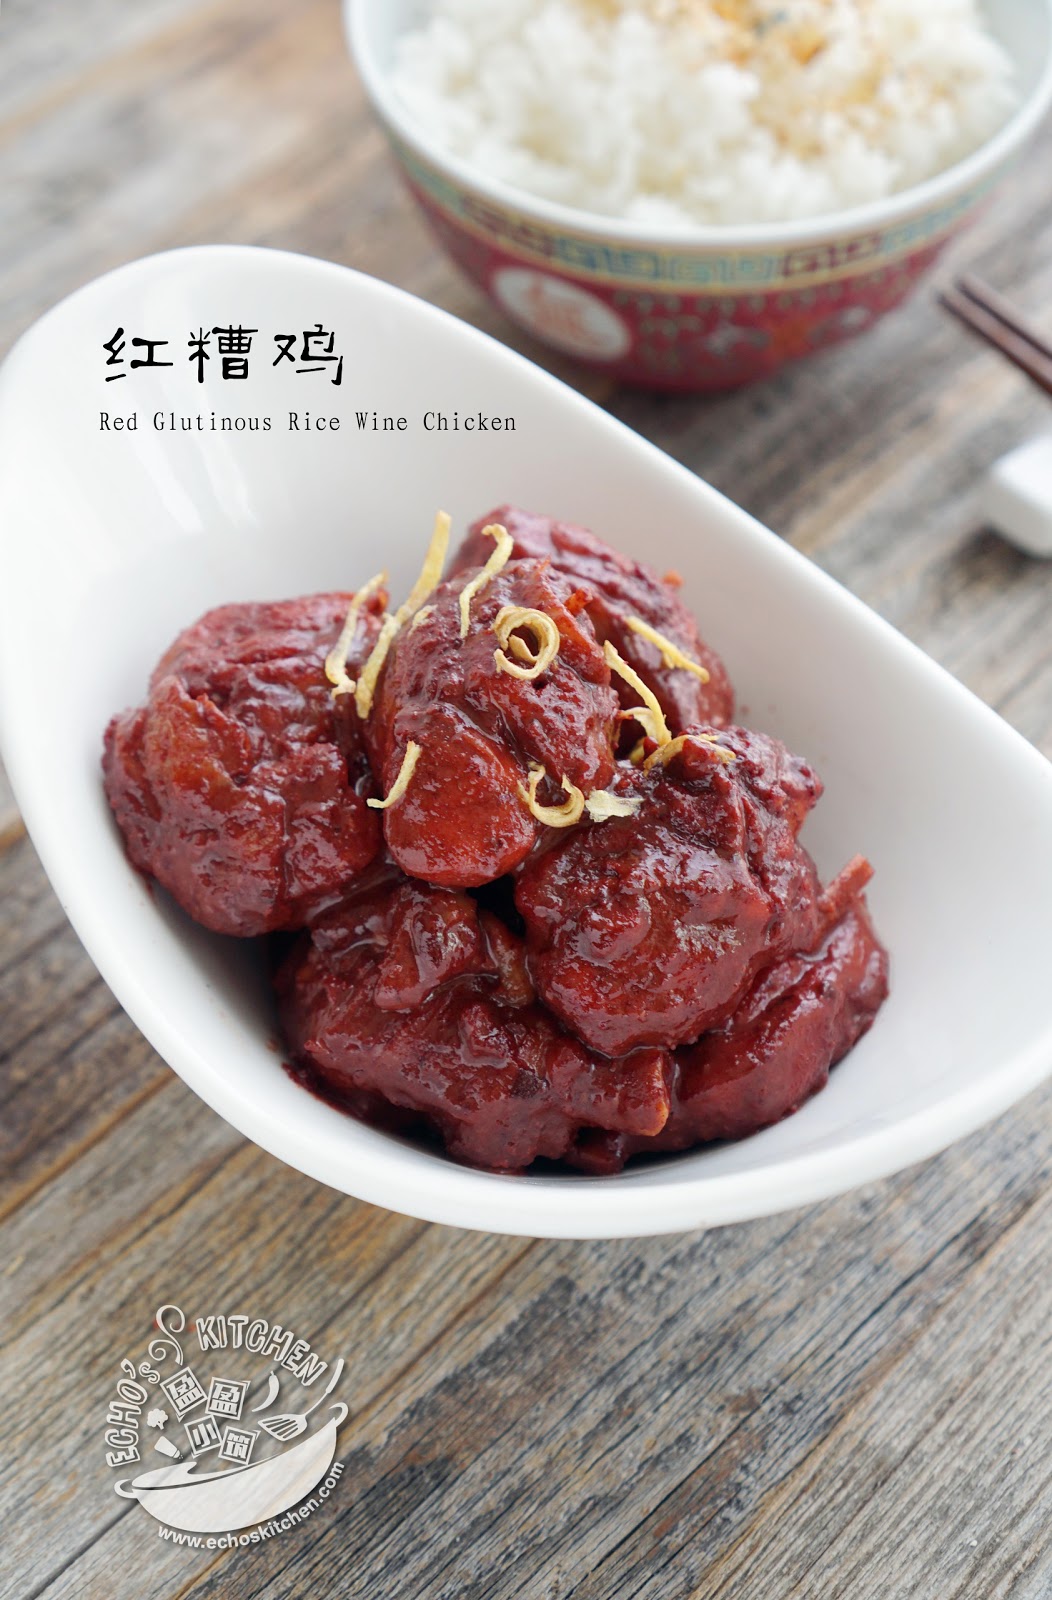 A taste of memories -- Echo's Kitchen: 【自制红曲米酒和红糟】Home-Made Chinese Red Yeast Rice Wine and ...